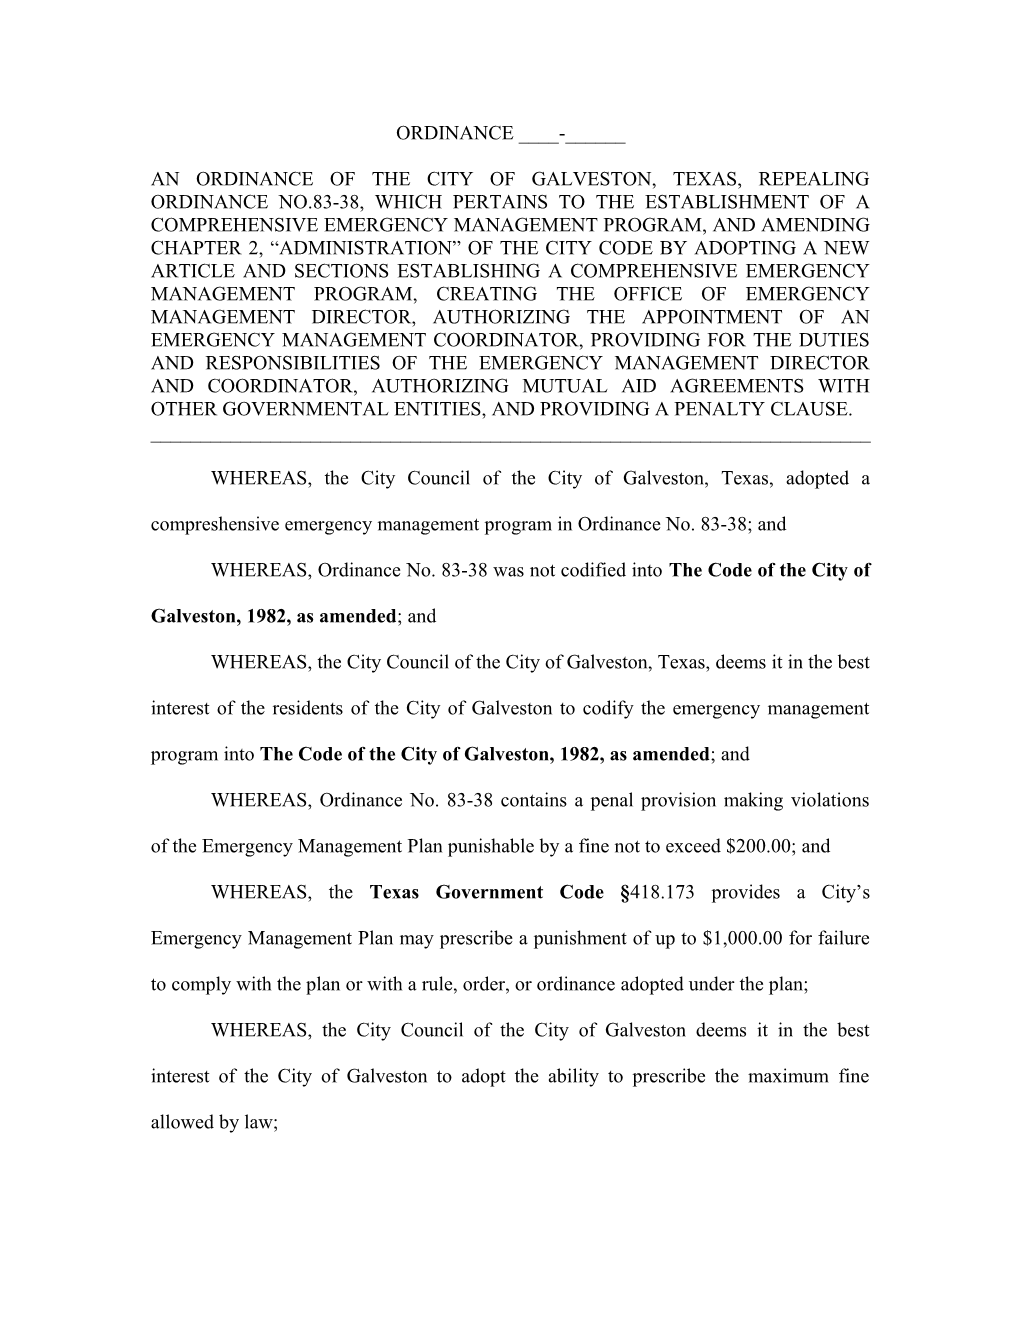 An Ordinance of the City of Galveston, Texas, Repealing Ordinance No.83-38, Which Pertains